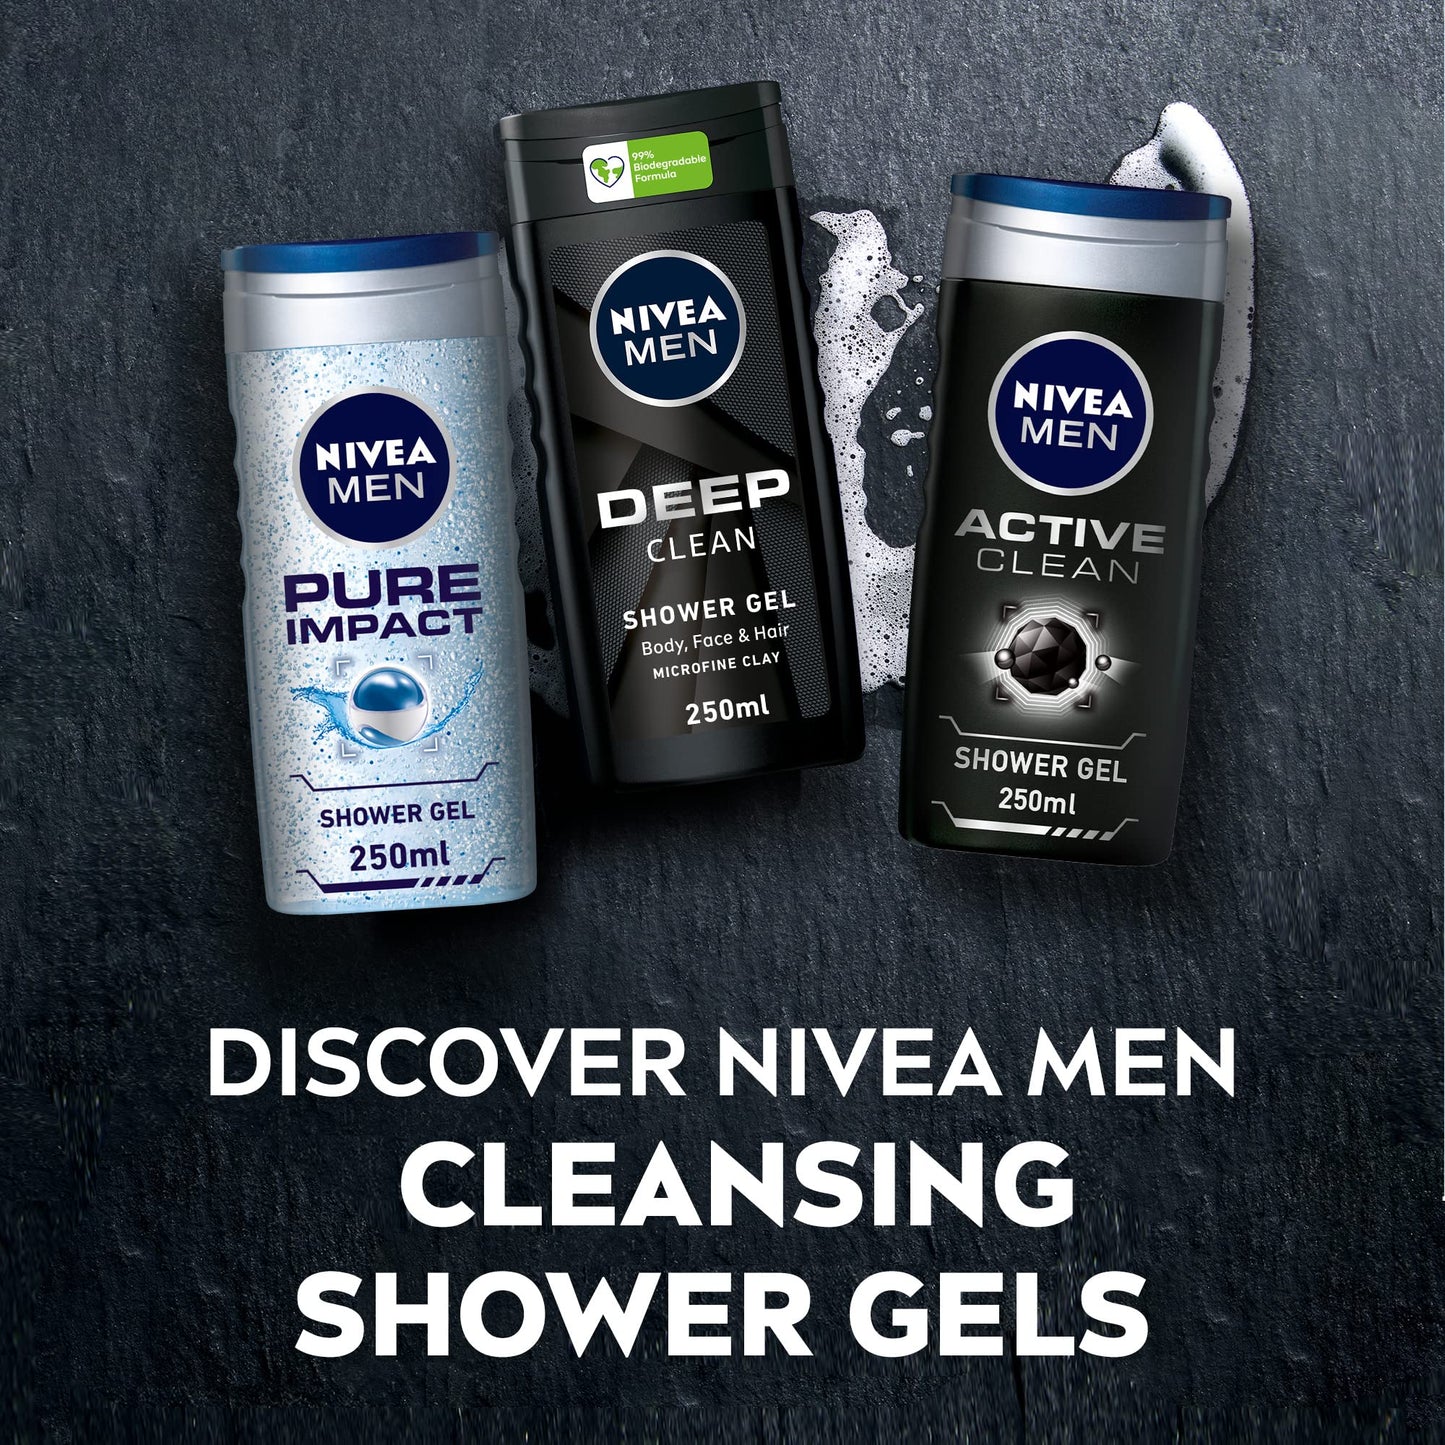 NIVEA MEN 3in1 Shower Gel Body Wash, Cleansing DEEP Micro-Fine Clay, Woody Scent, 250ml